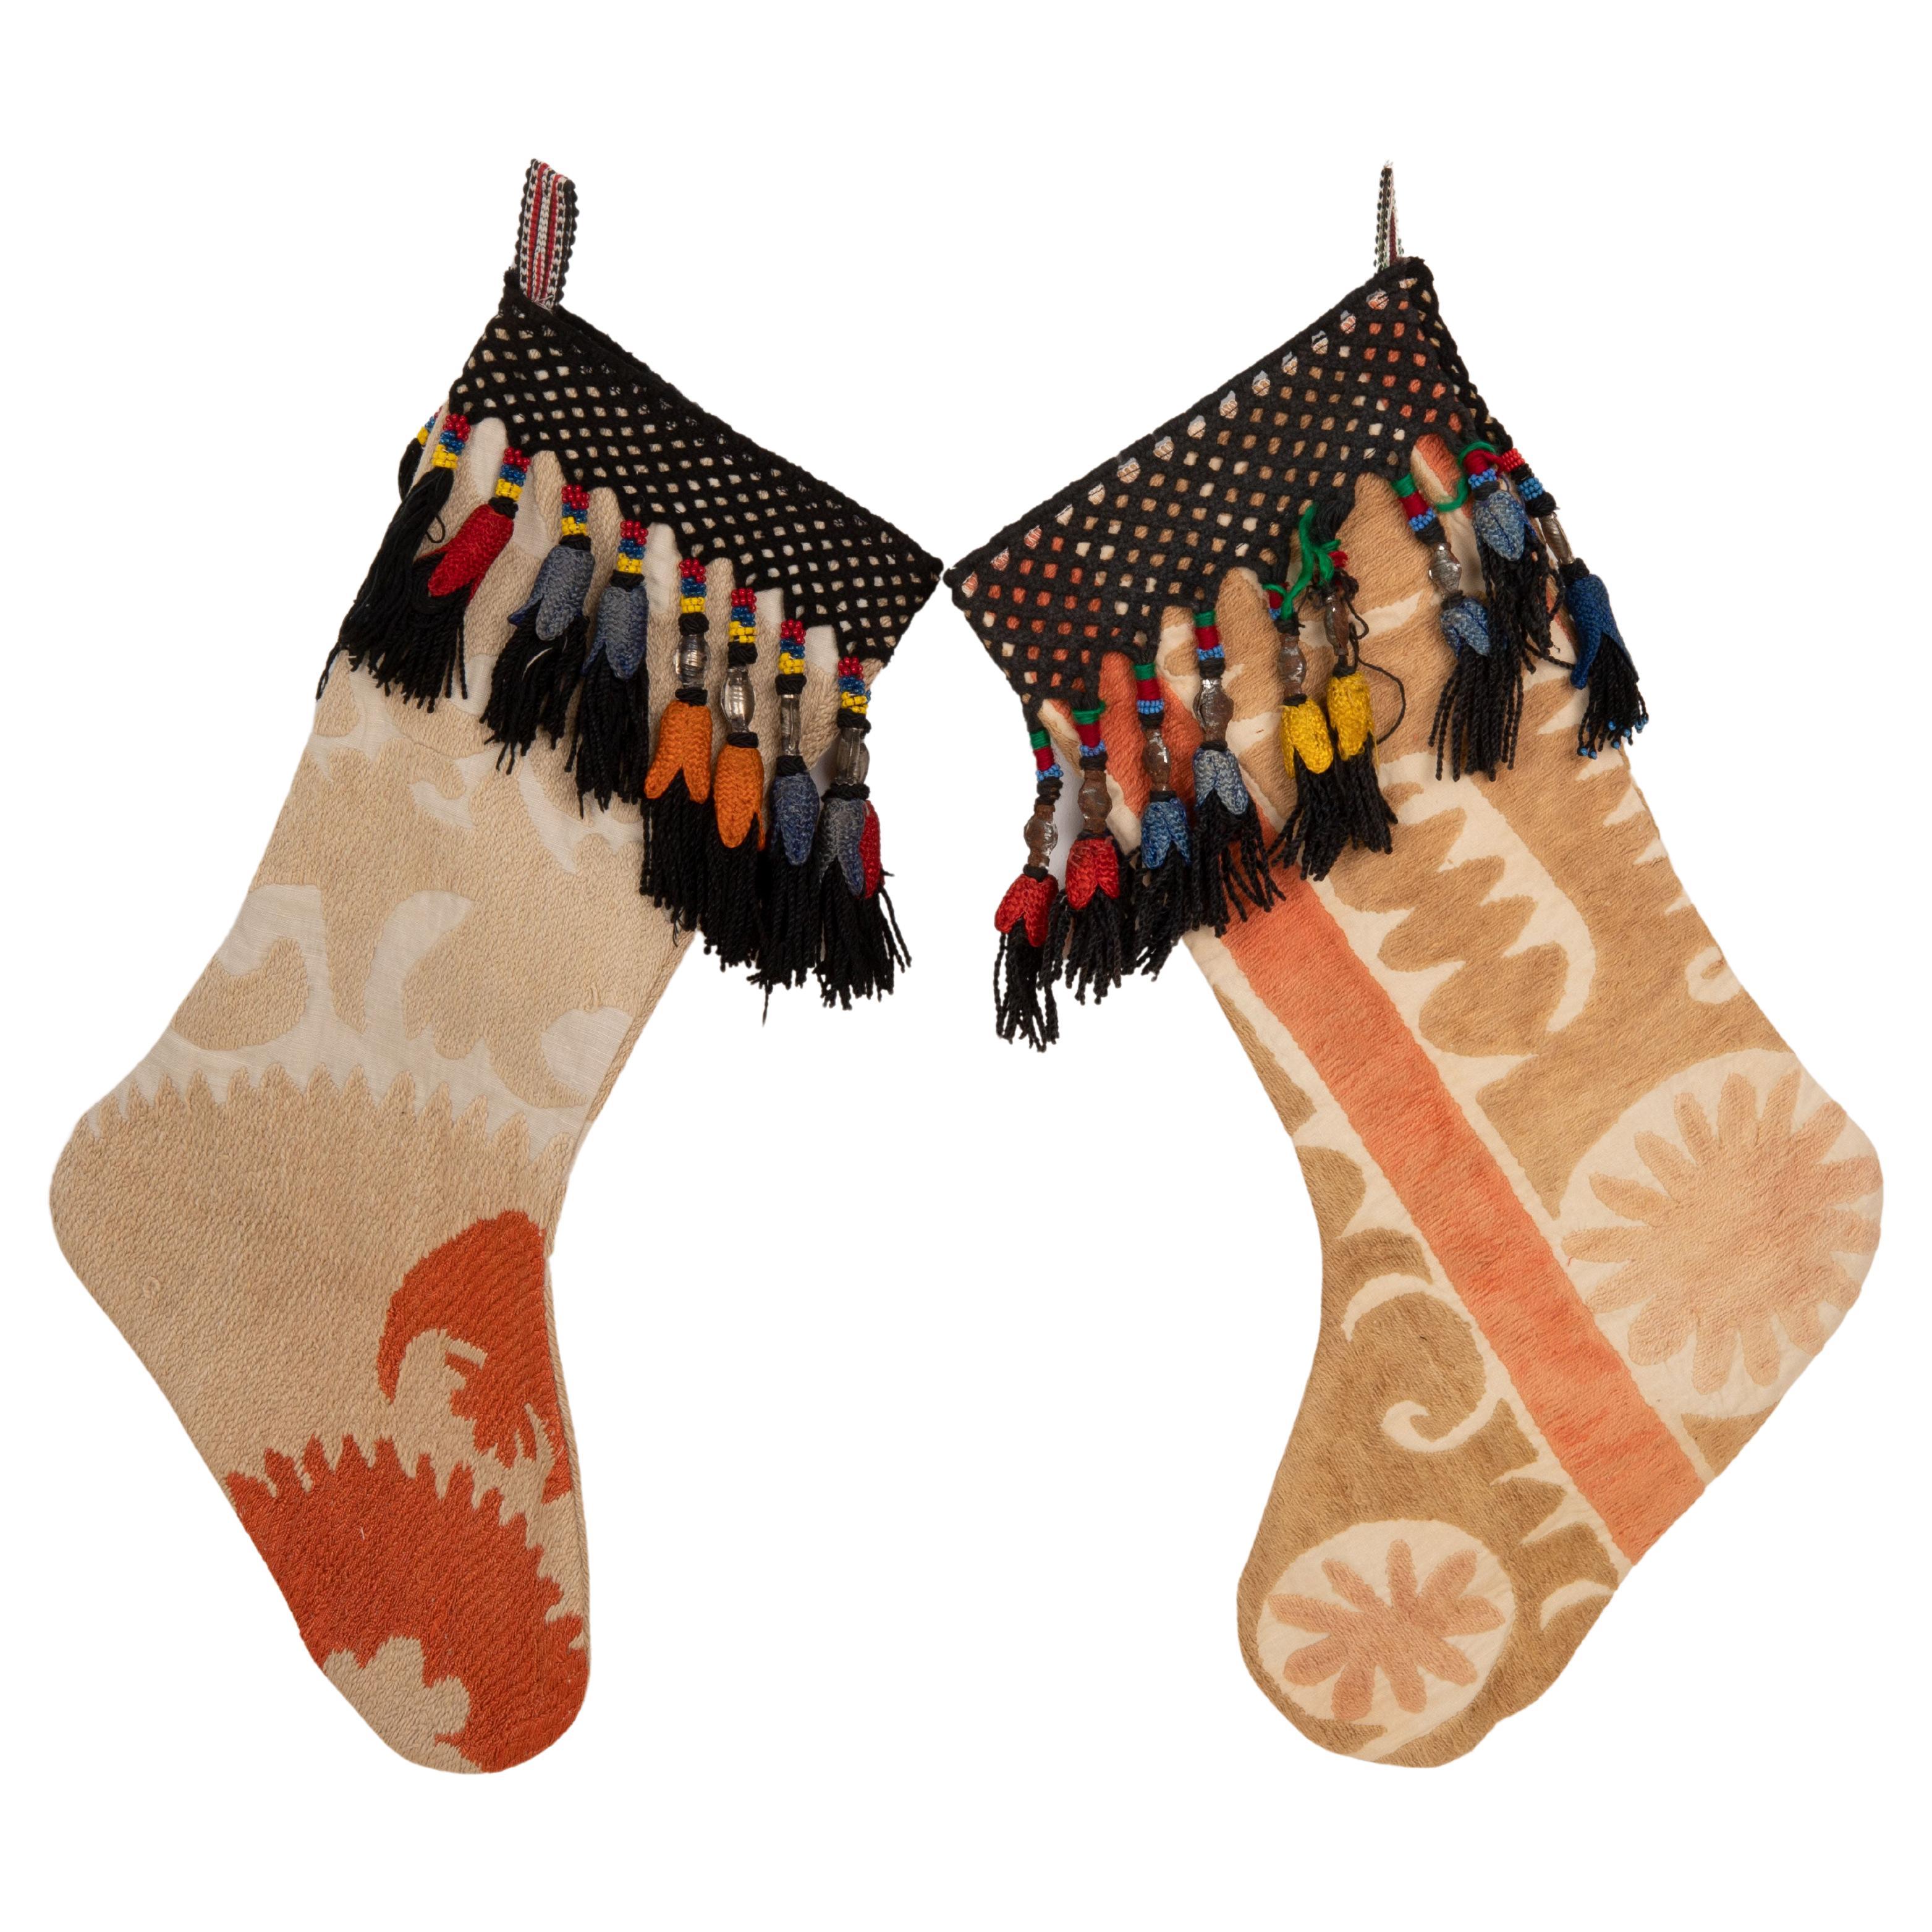 Double Sided Christmas Stockings Made from Vintage Suzani Fragments For Sale